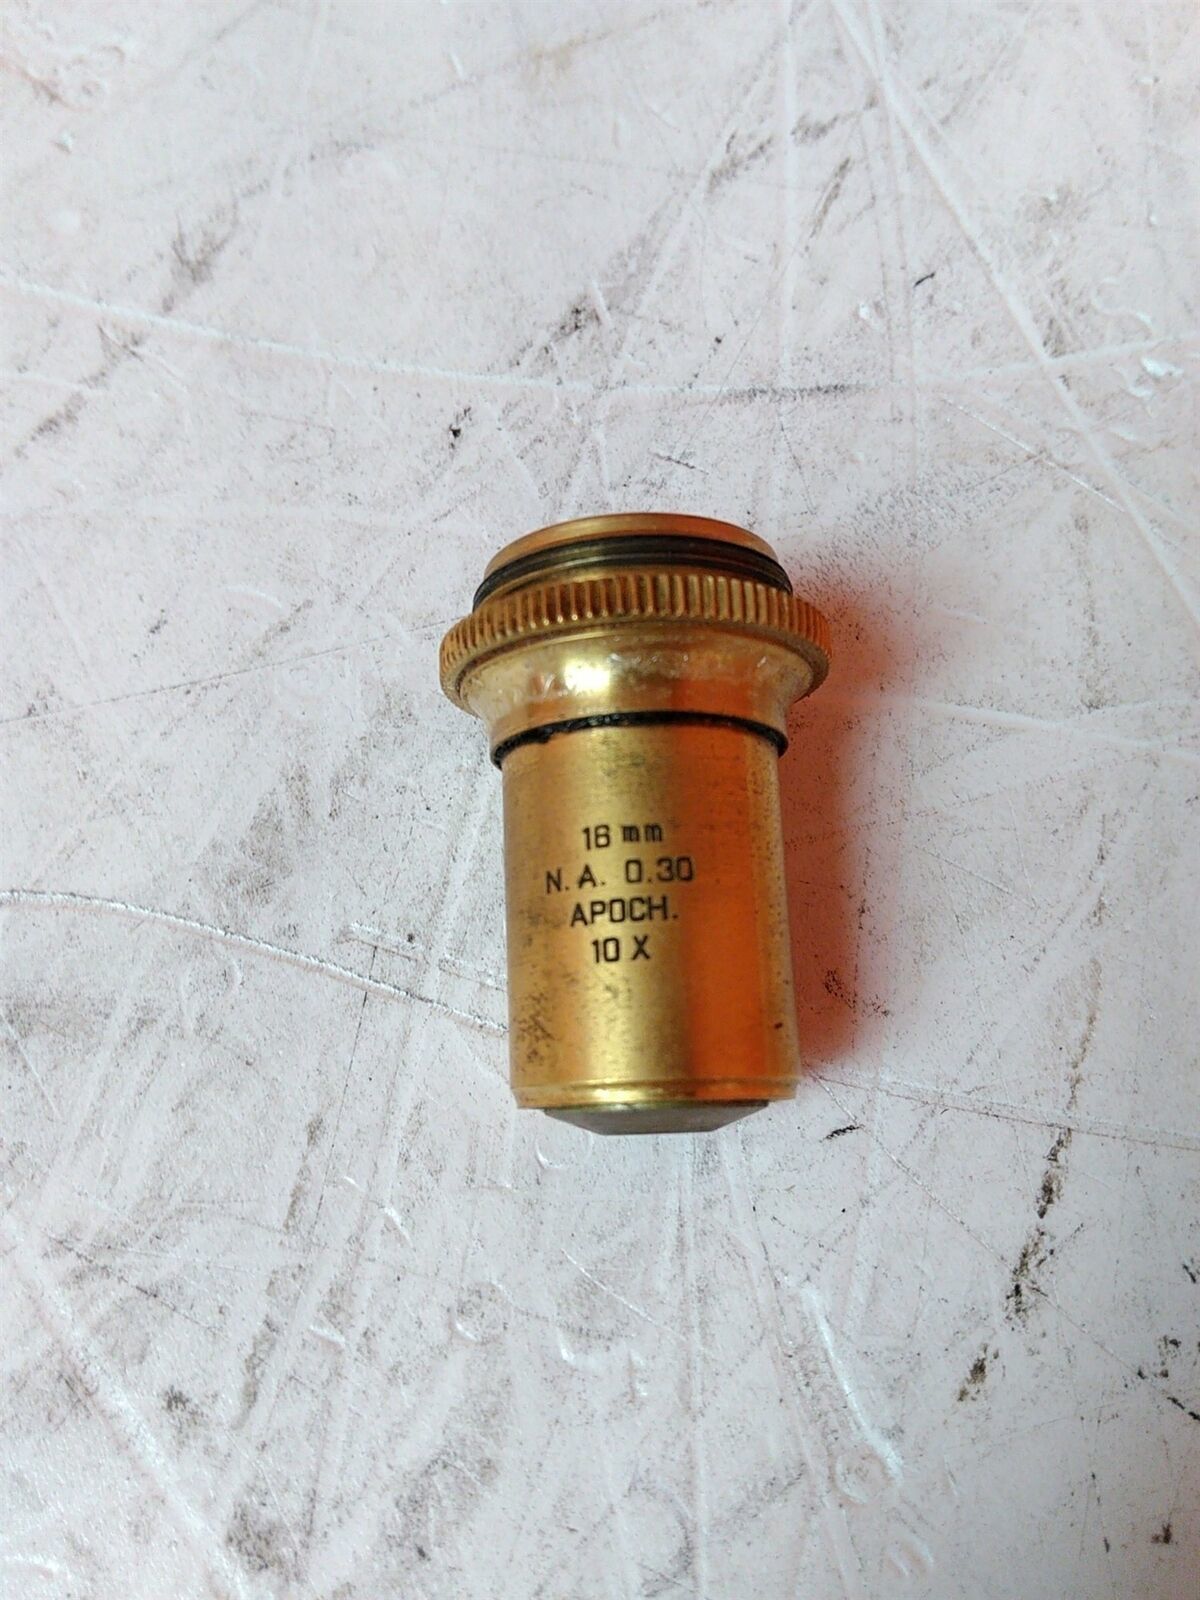 Primary image for AO Spencer 18mm NA 0.30 APOCH. 10X Vintage Brass Microscope Objective AS-IS